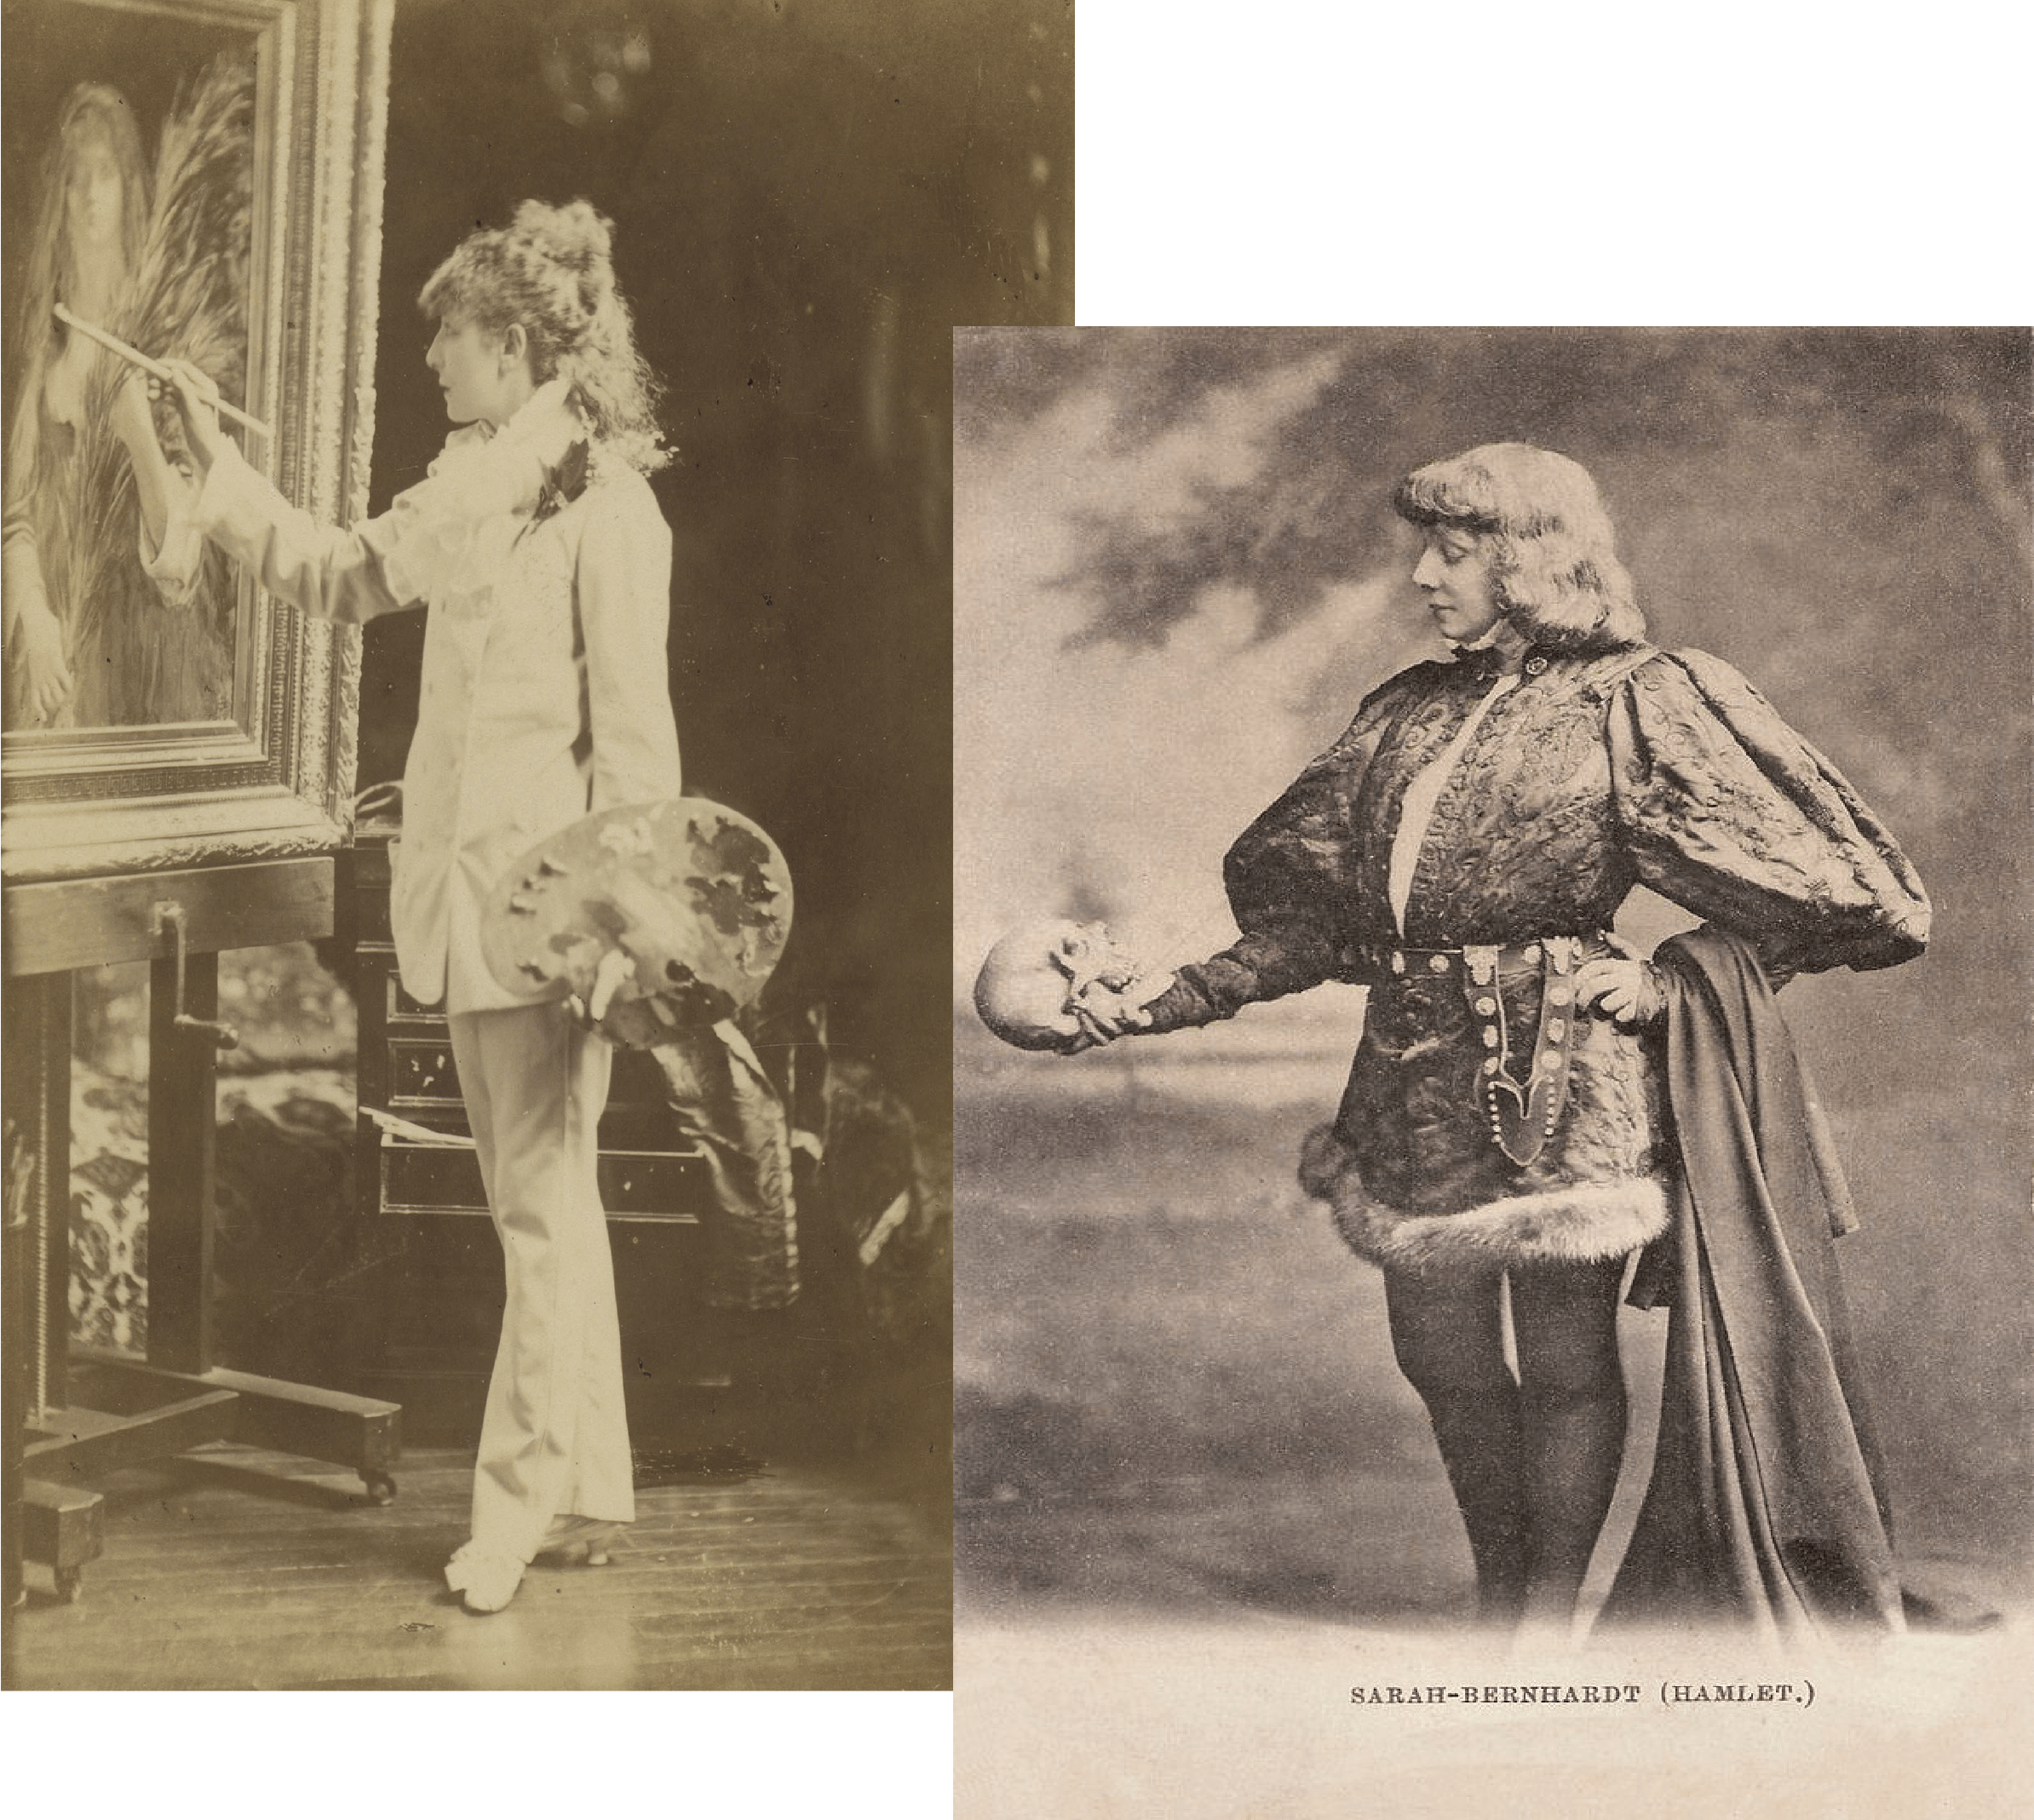 In 1870 actress Sarah Bernhardt wearing suit for first time and playing hamlet in 1899